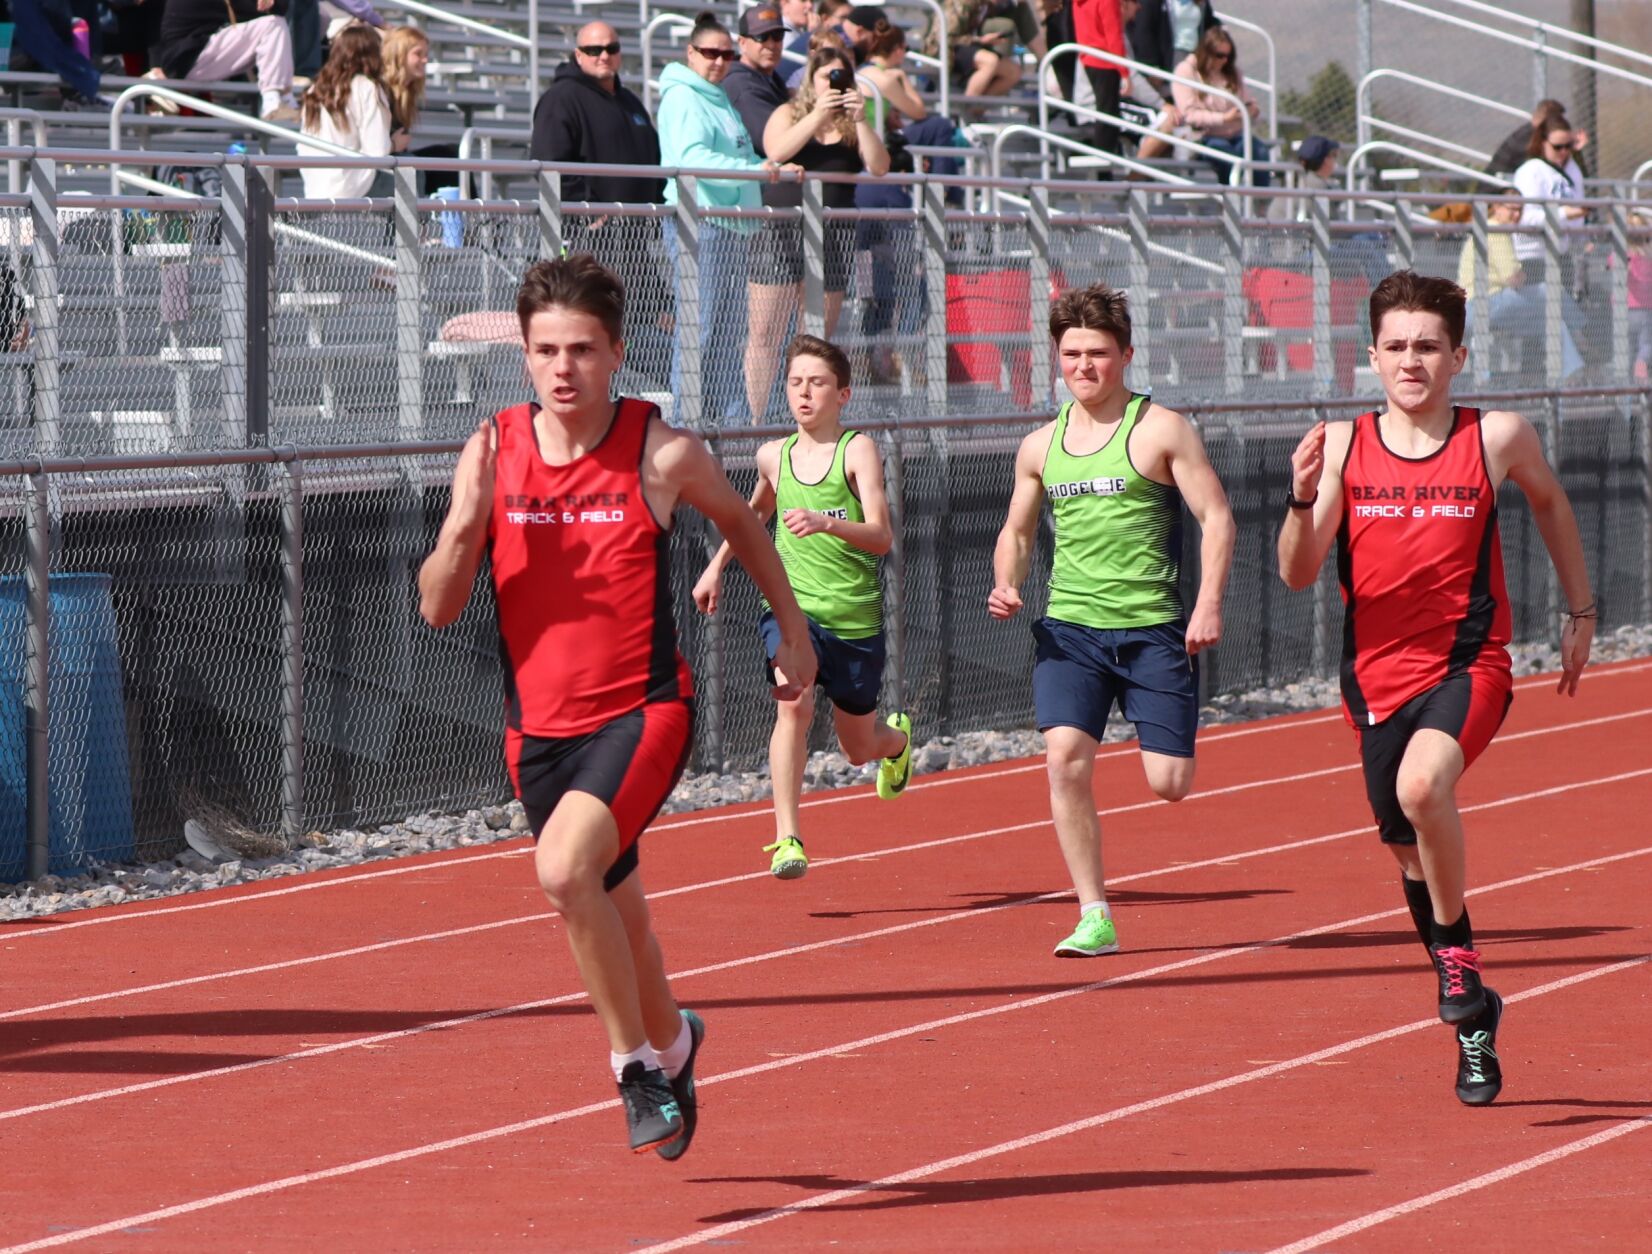 Ridgeline sweeps Boys’ 100M Dash as Bears Shine in Shot Put and Discus